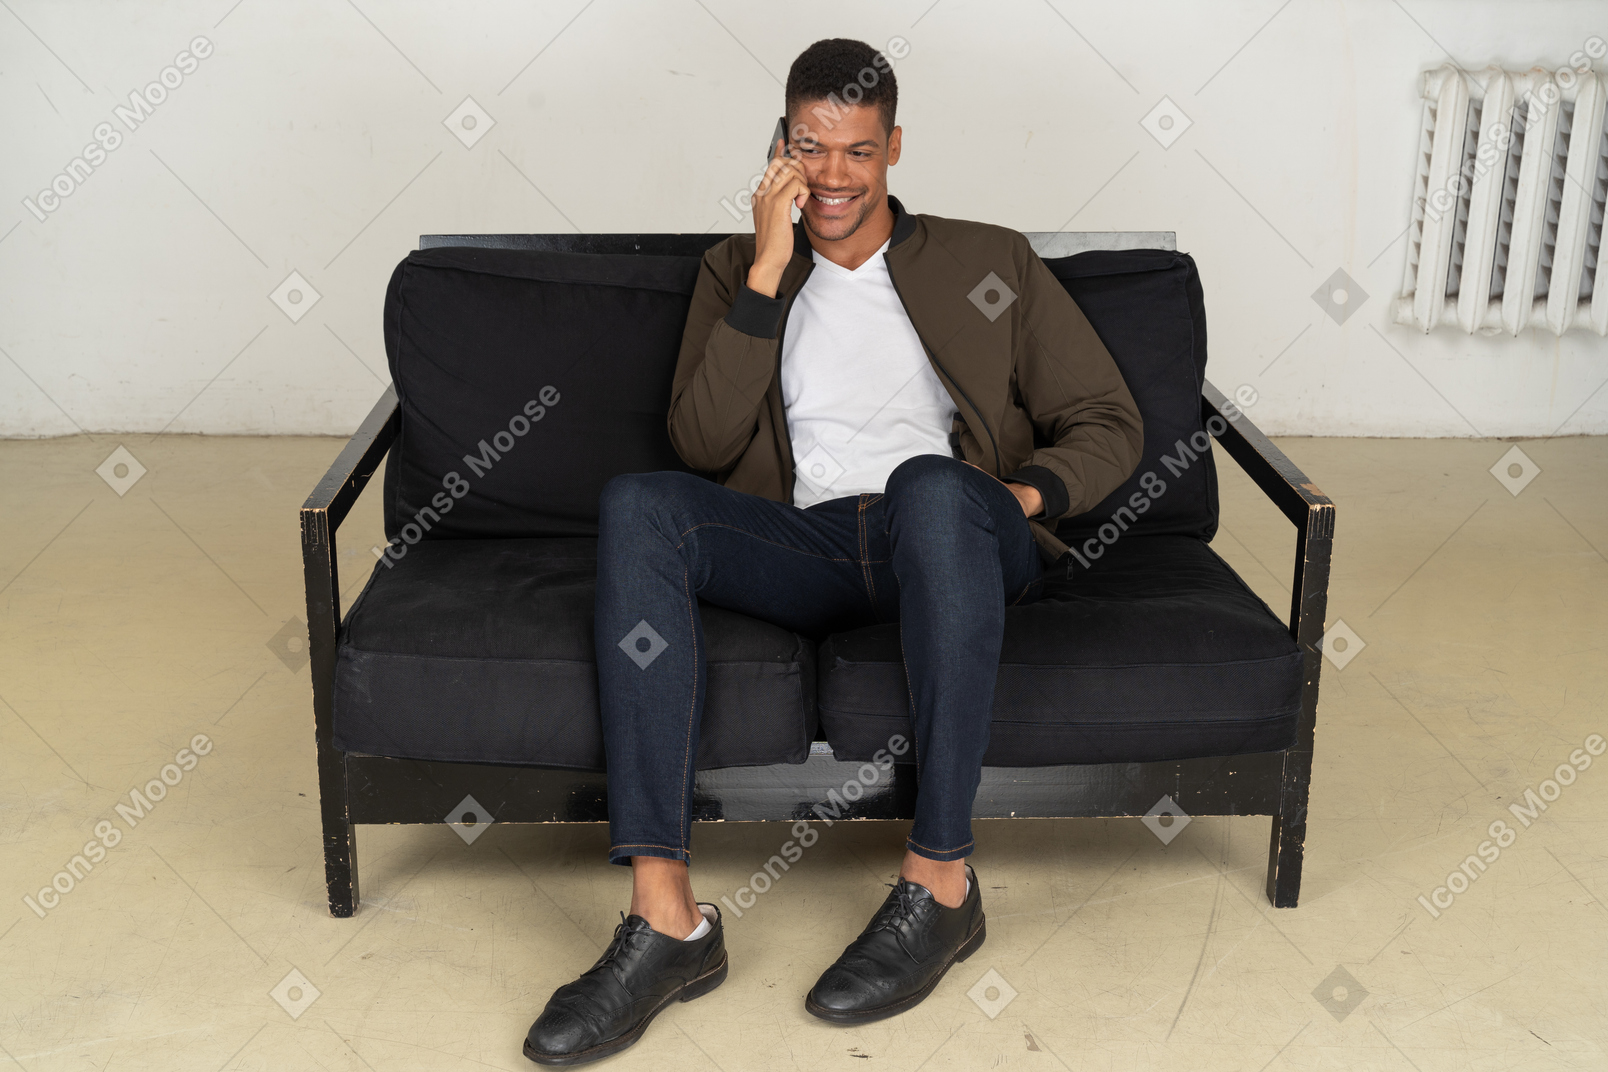 Front view of a smiling young man sitting on a sofa and talking on his phone